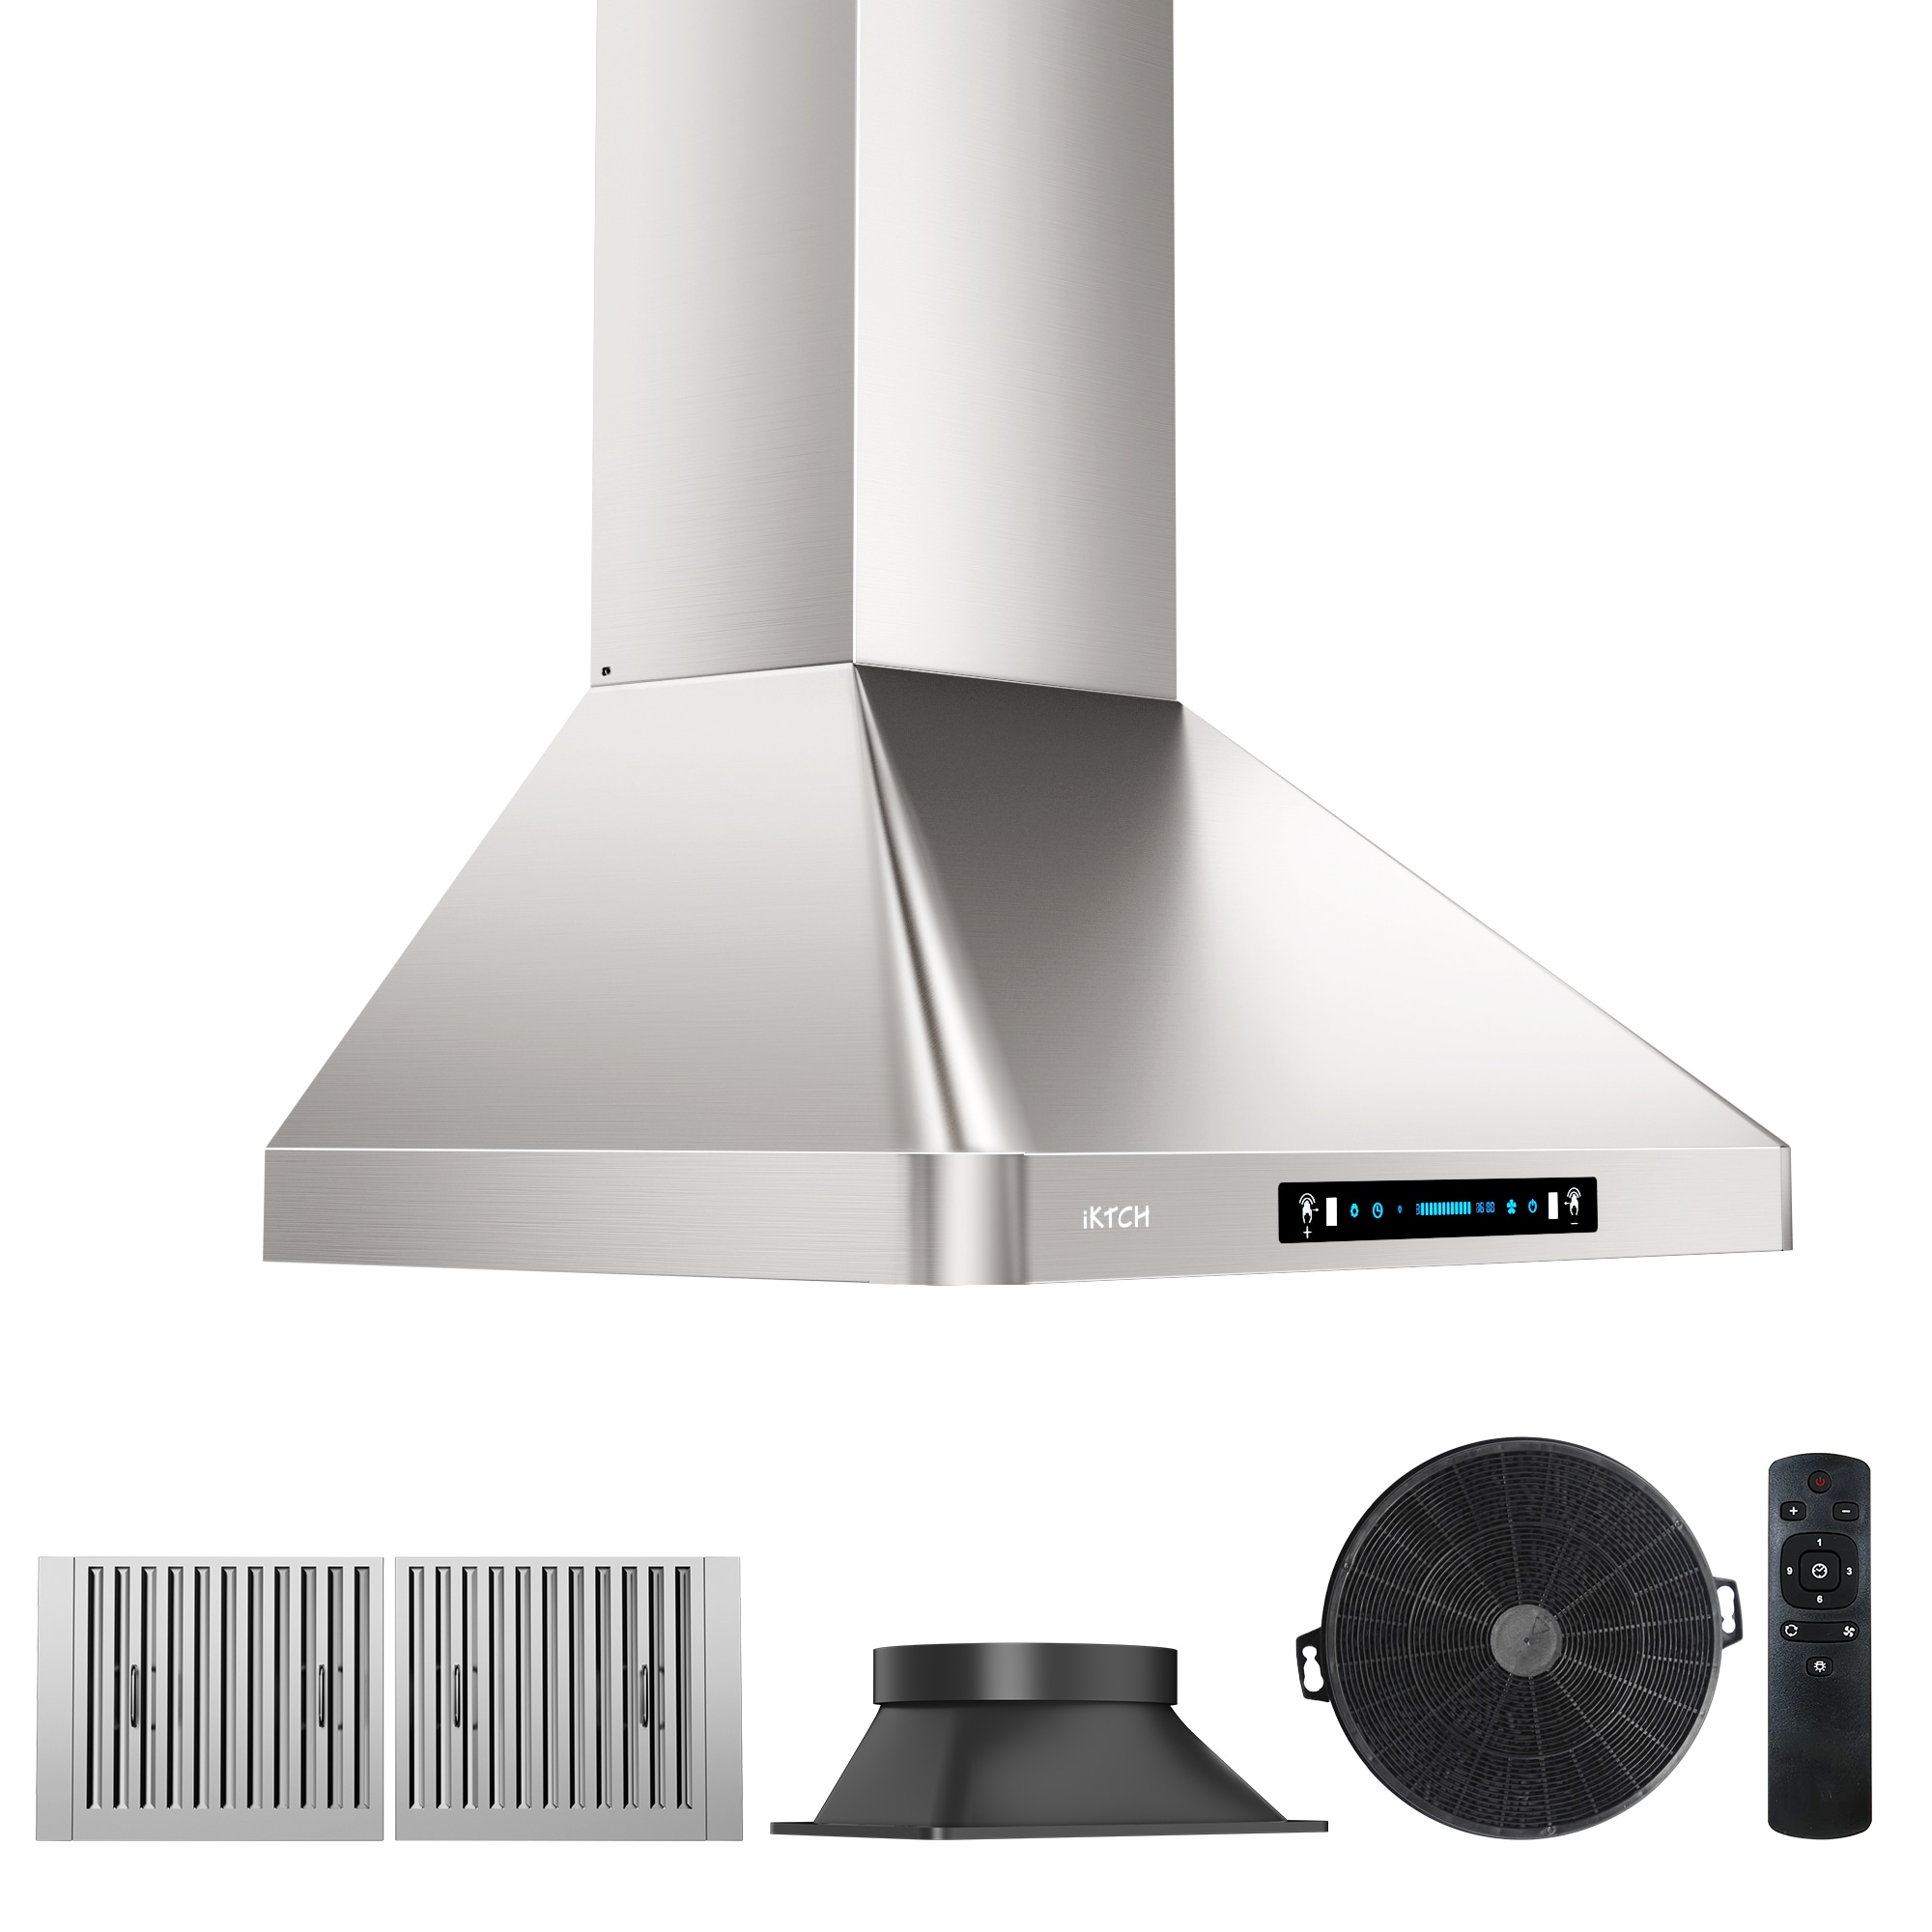 IKTCH 30 Inch Black Wall Mount Range Hood, 900 CFM Ducted/Ductless,Does Not  Incl